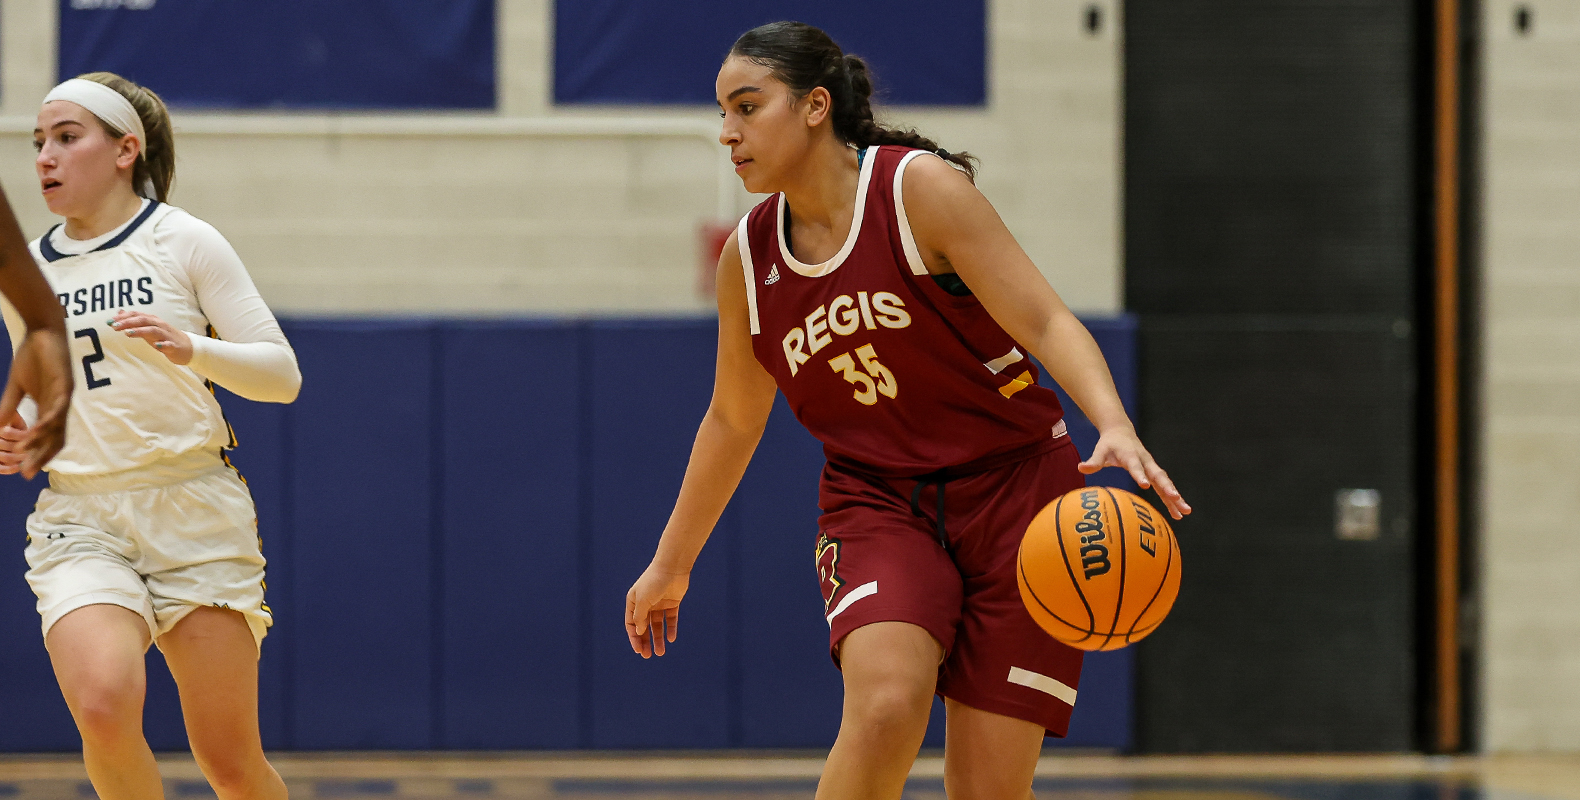 Women's Basketball Falls to 3-1 in GNAC Play